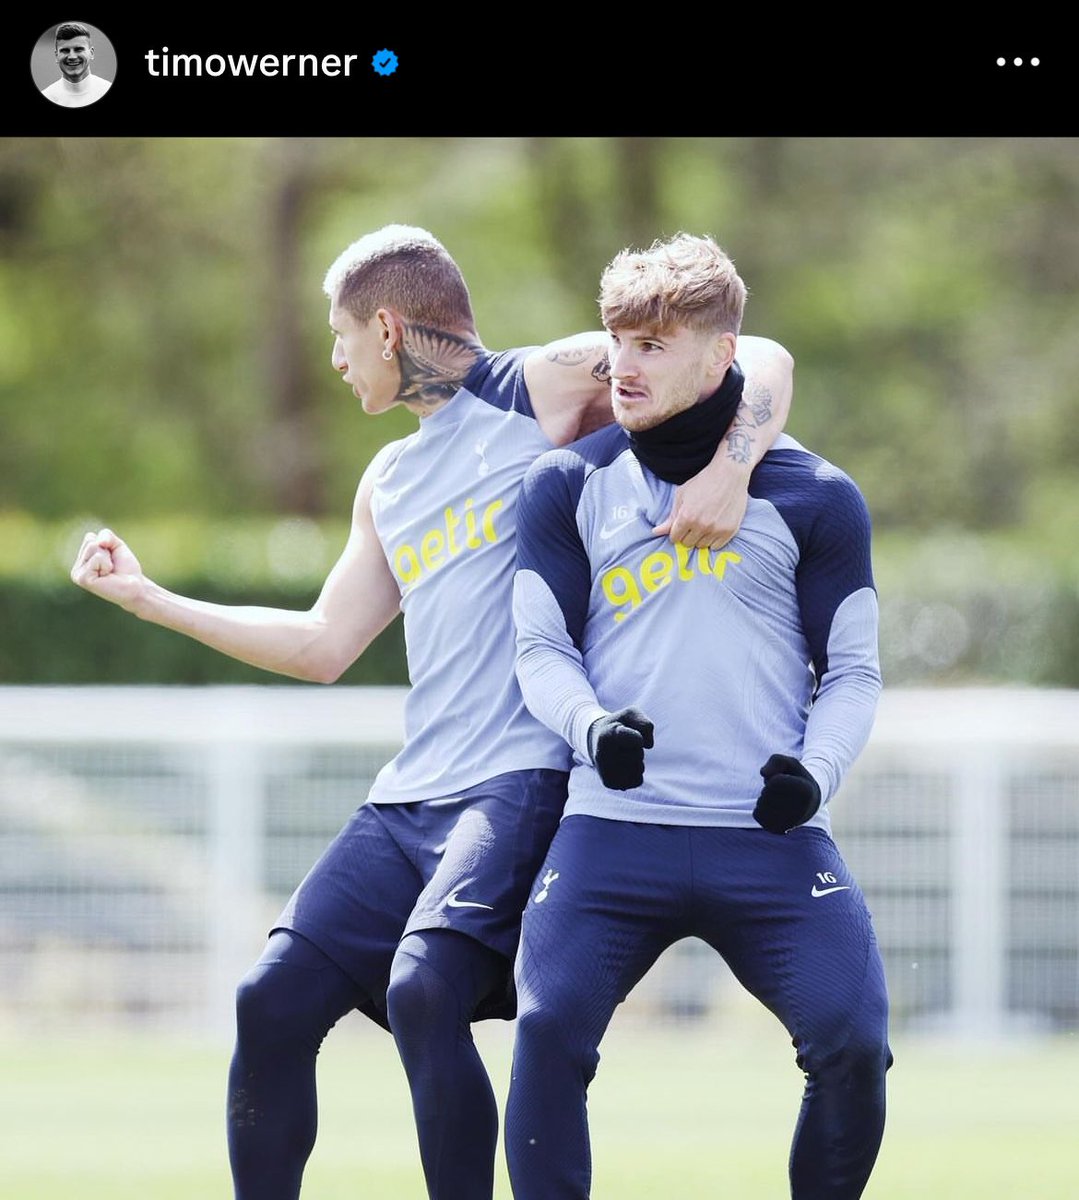 Timo Werner on Instagram: “Getting ready for a derby week 💪💪”